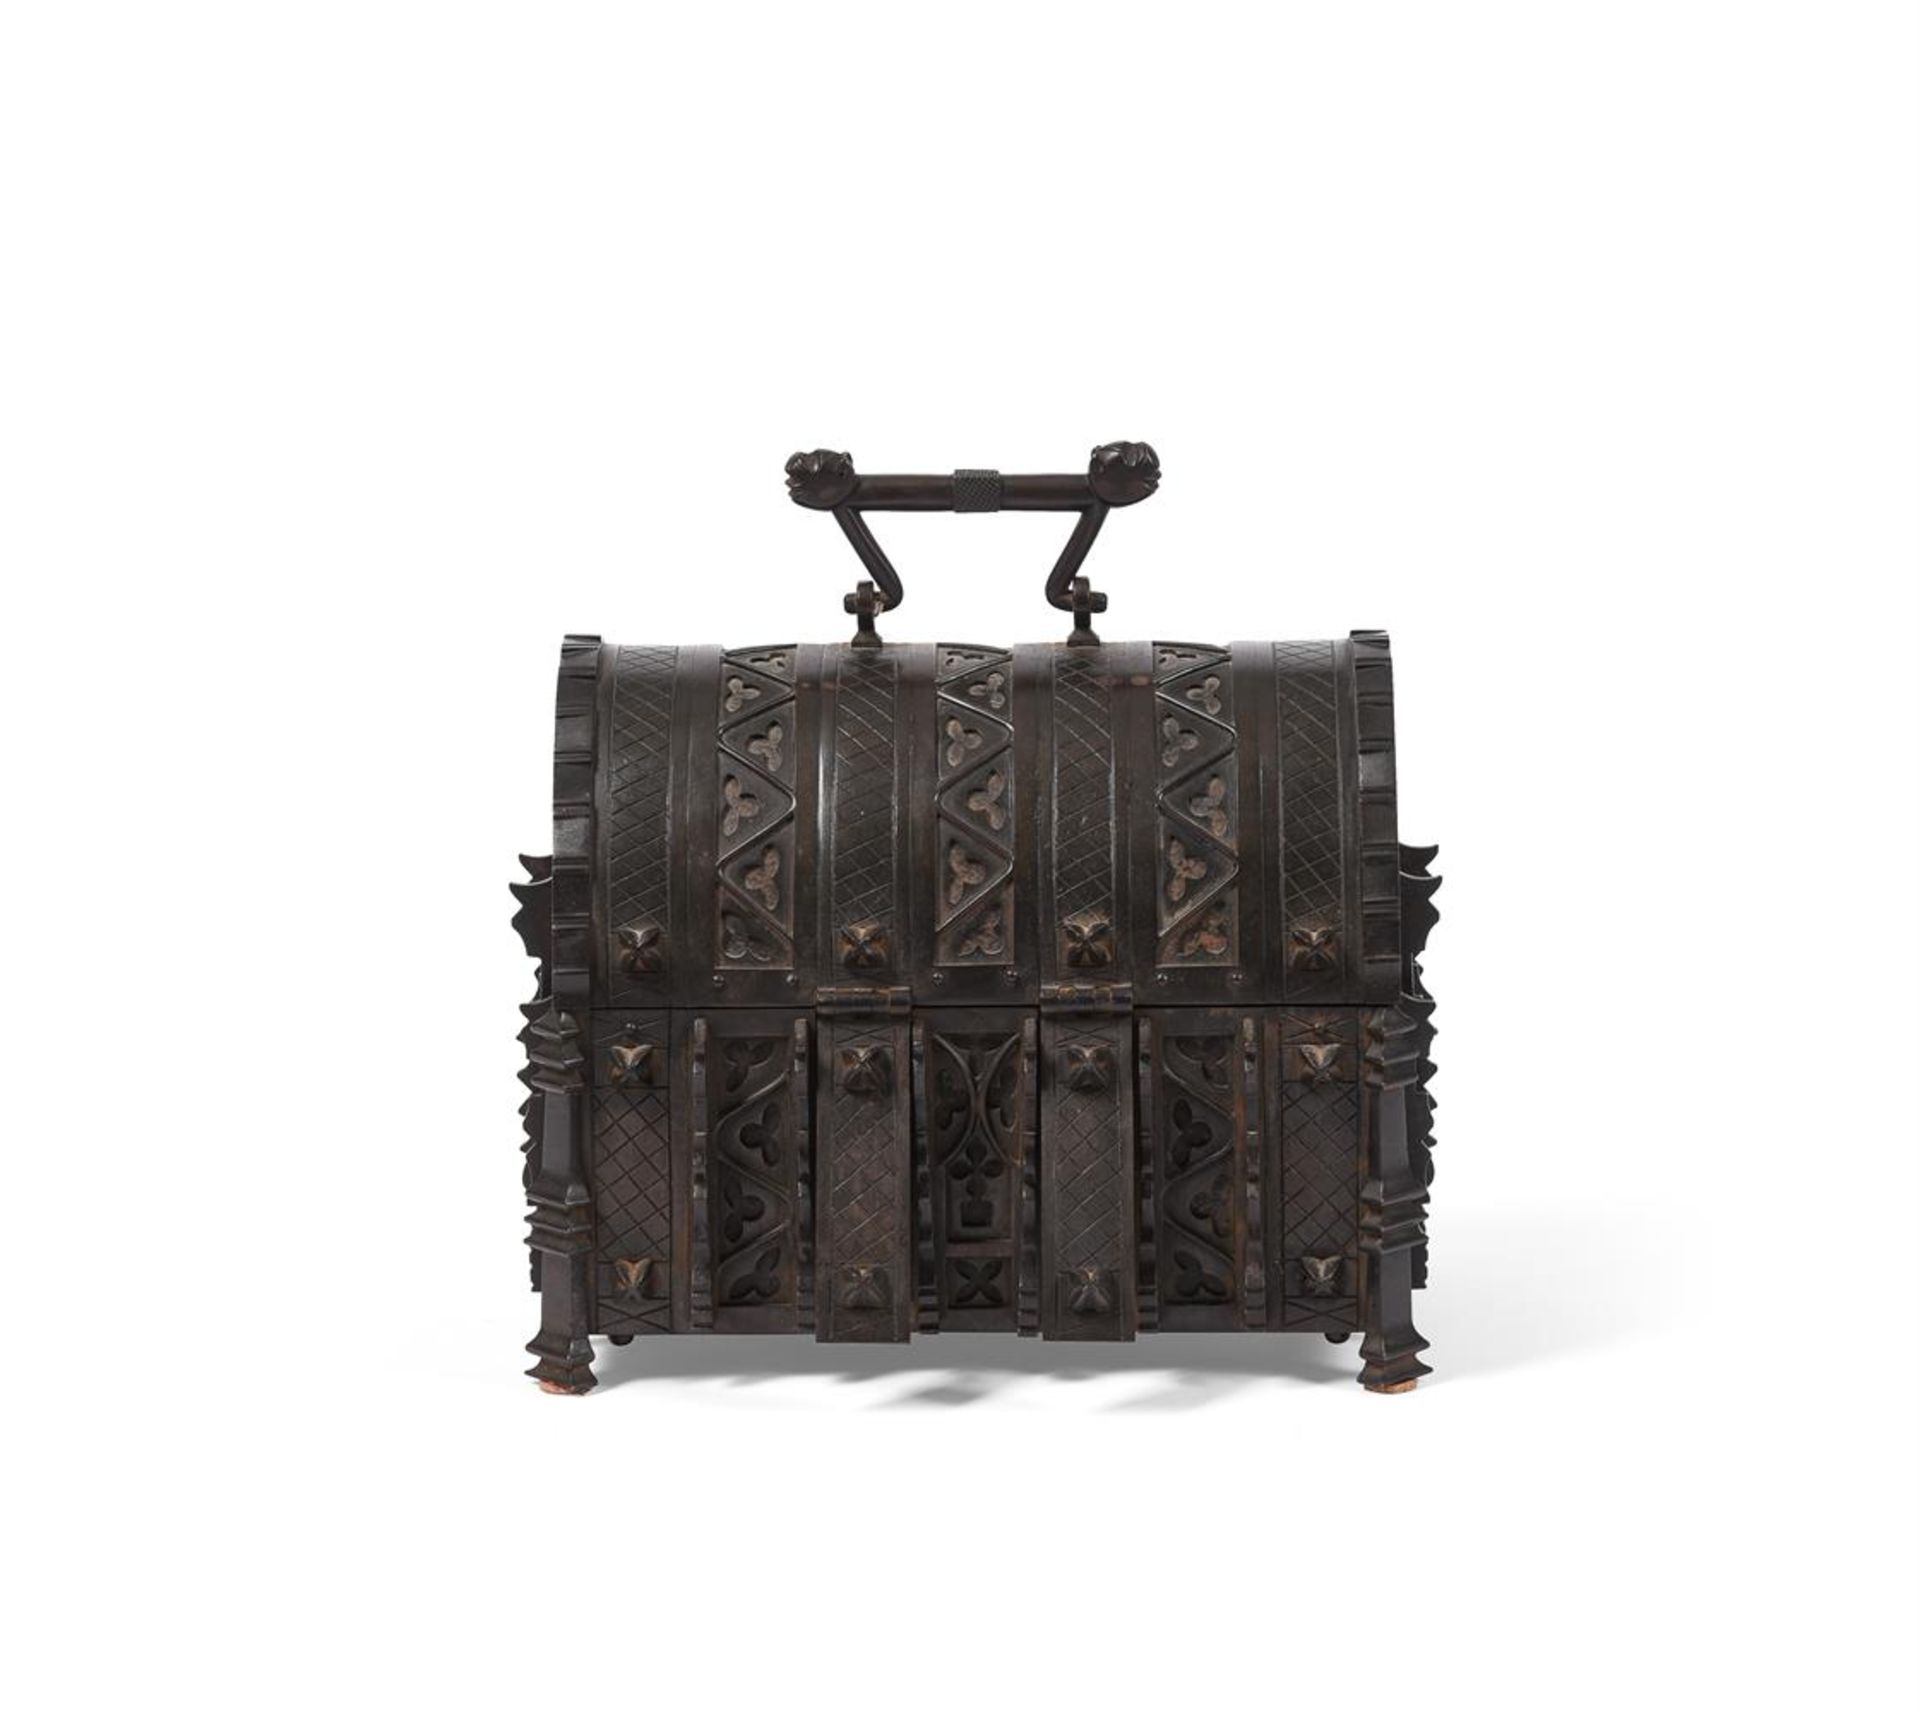 A CONTINENTAL GOTHIC IRON DOMED CASKET, IN THE 16TH CENTURY MANNER, 19TH CENTURY - Image 3 of 3